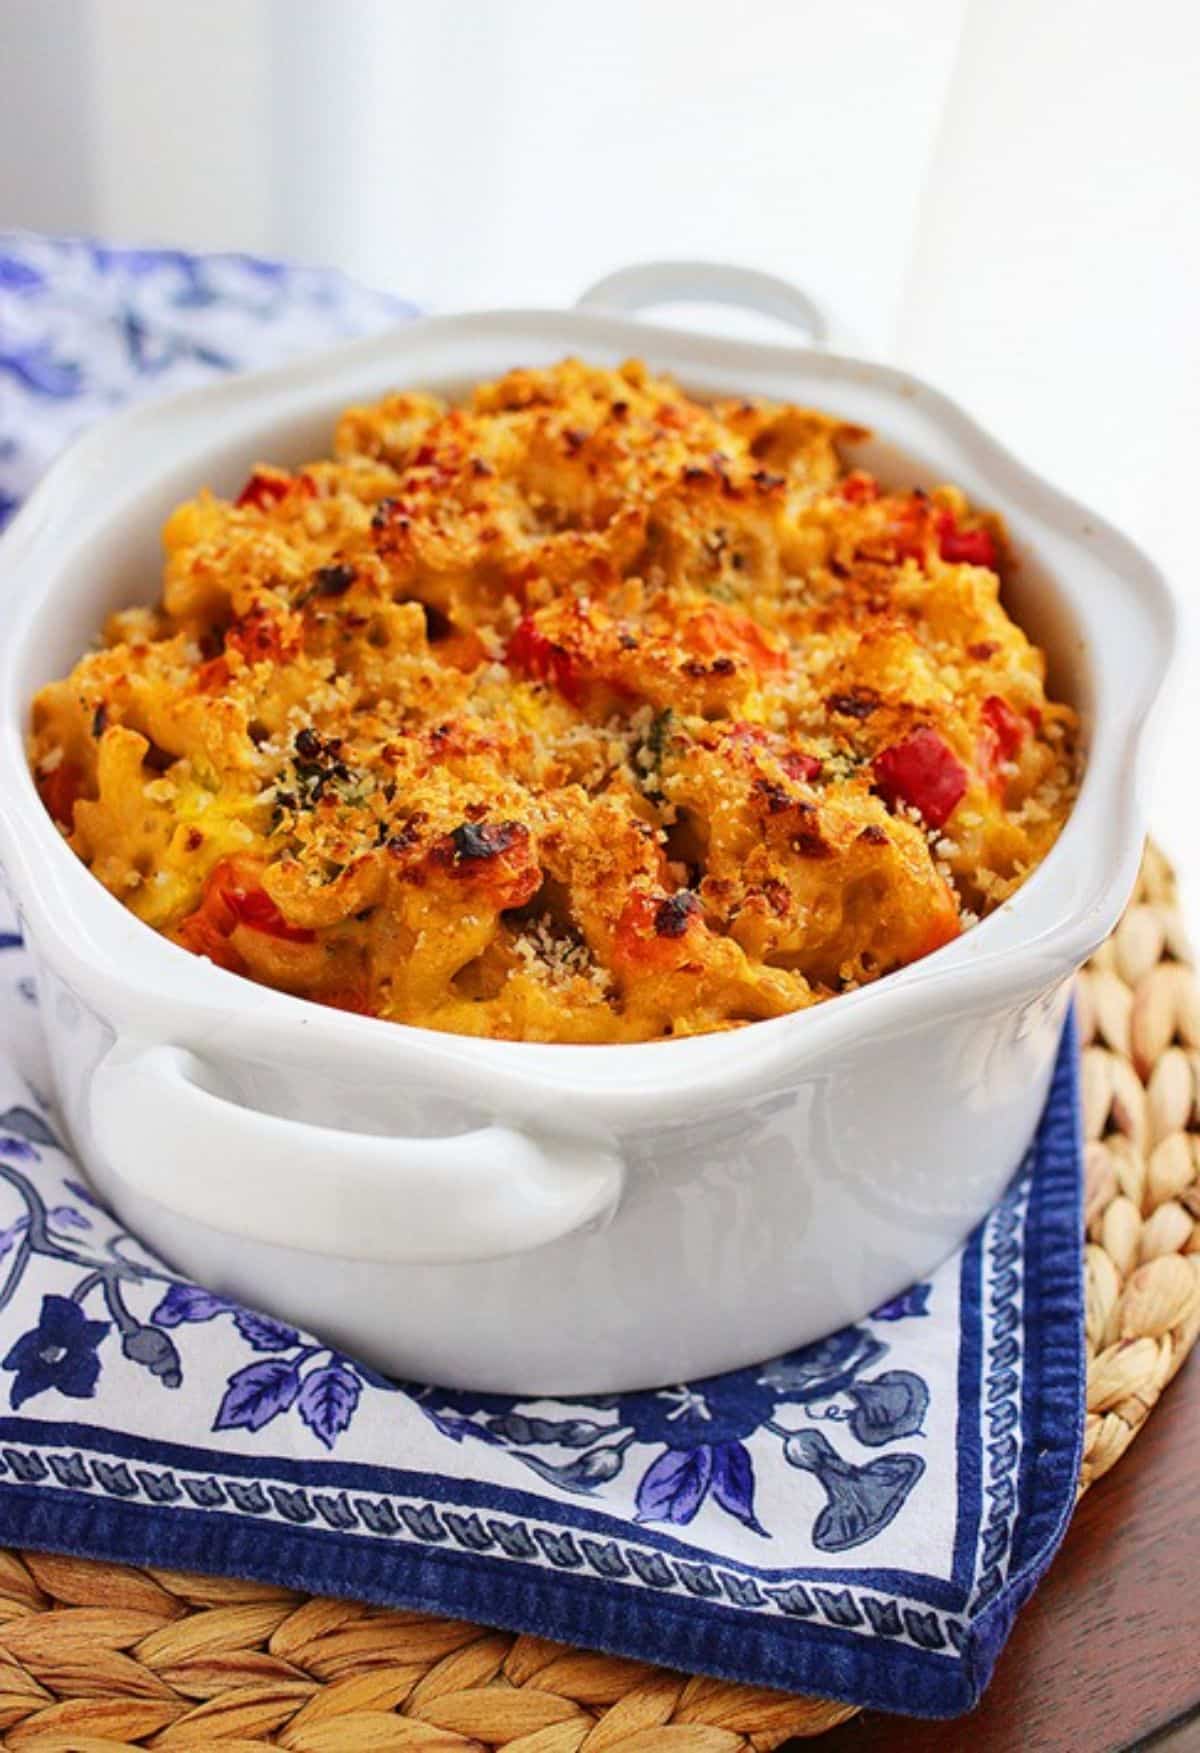 Delicious Spicy Vegetable Macaroni And Cheese in a white pot.